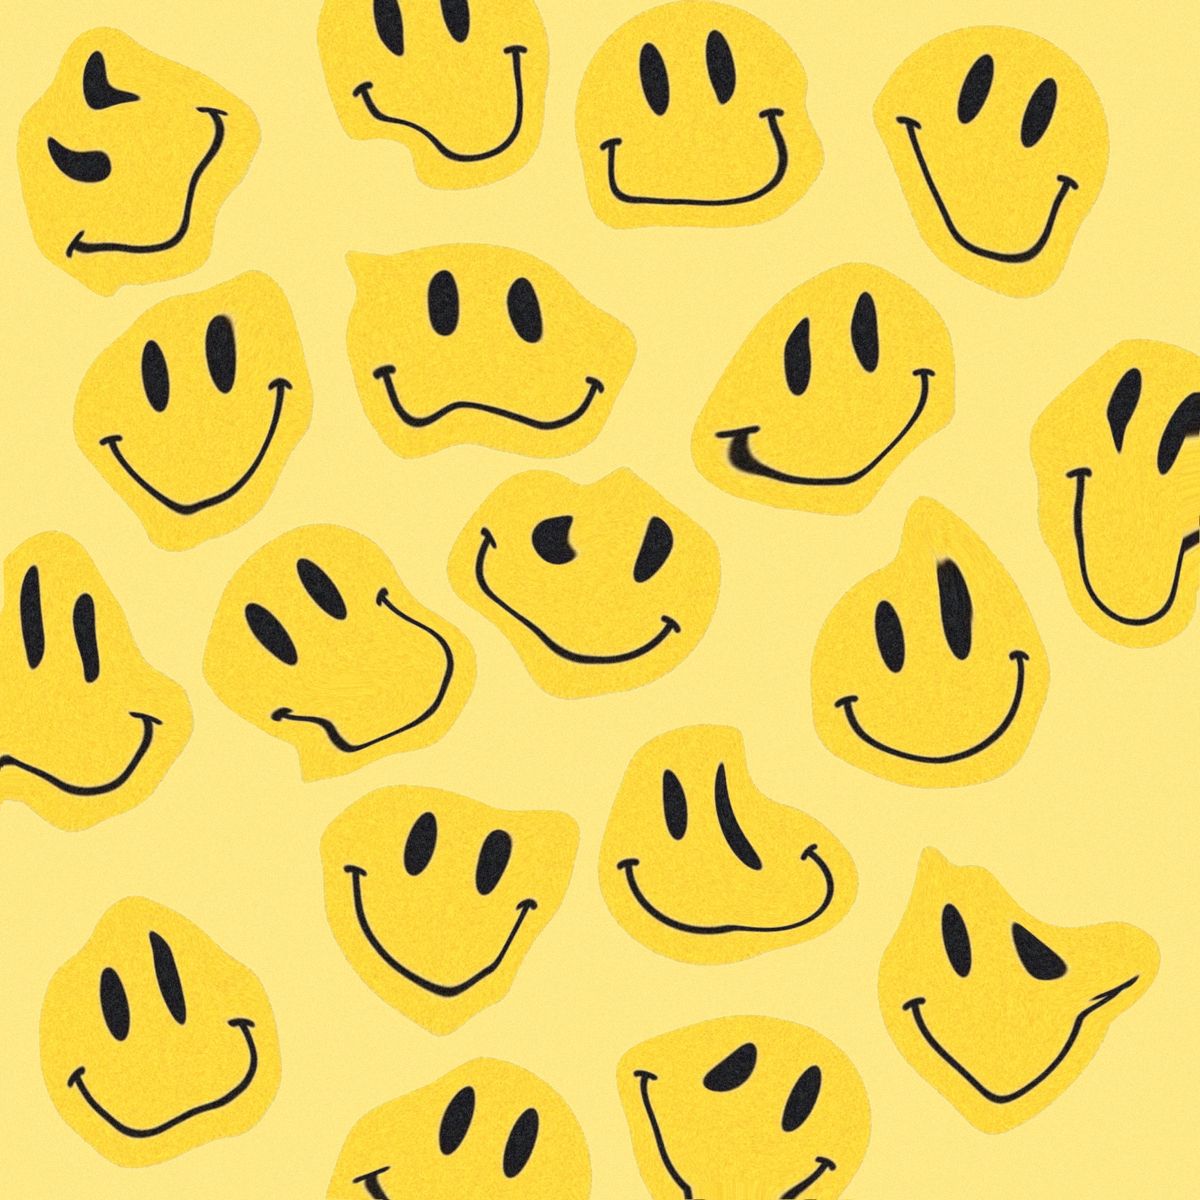 Melting smiley faces aesthetic melting smiley faces HD phone wallpaper   Peakpx